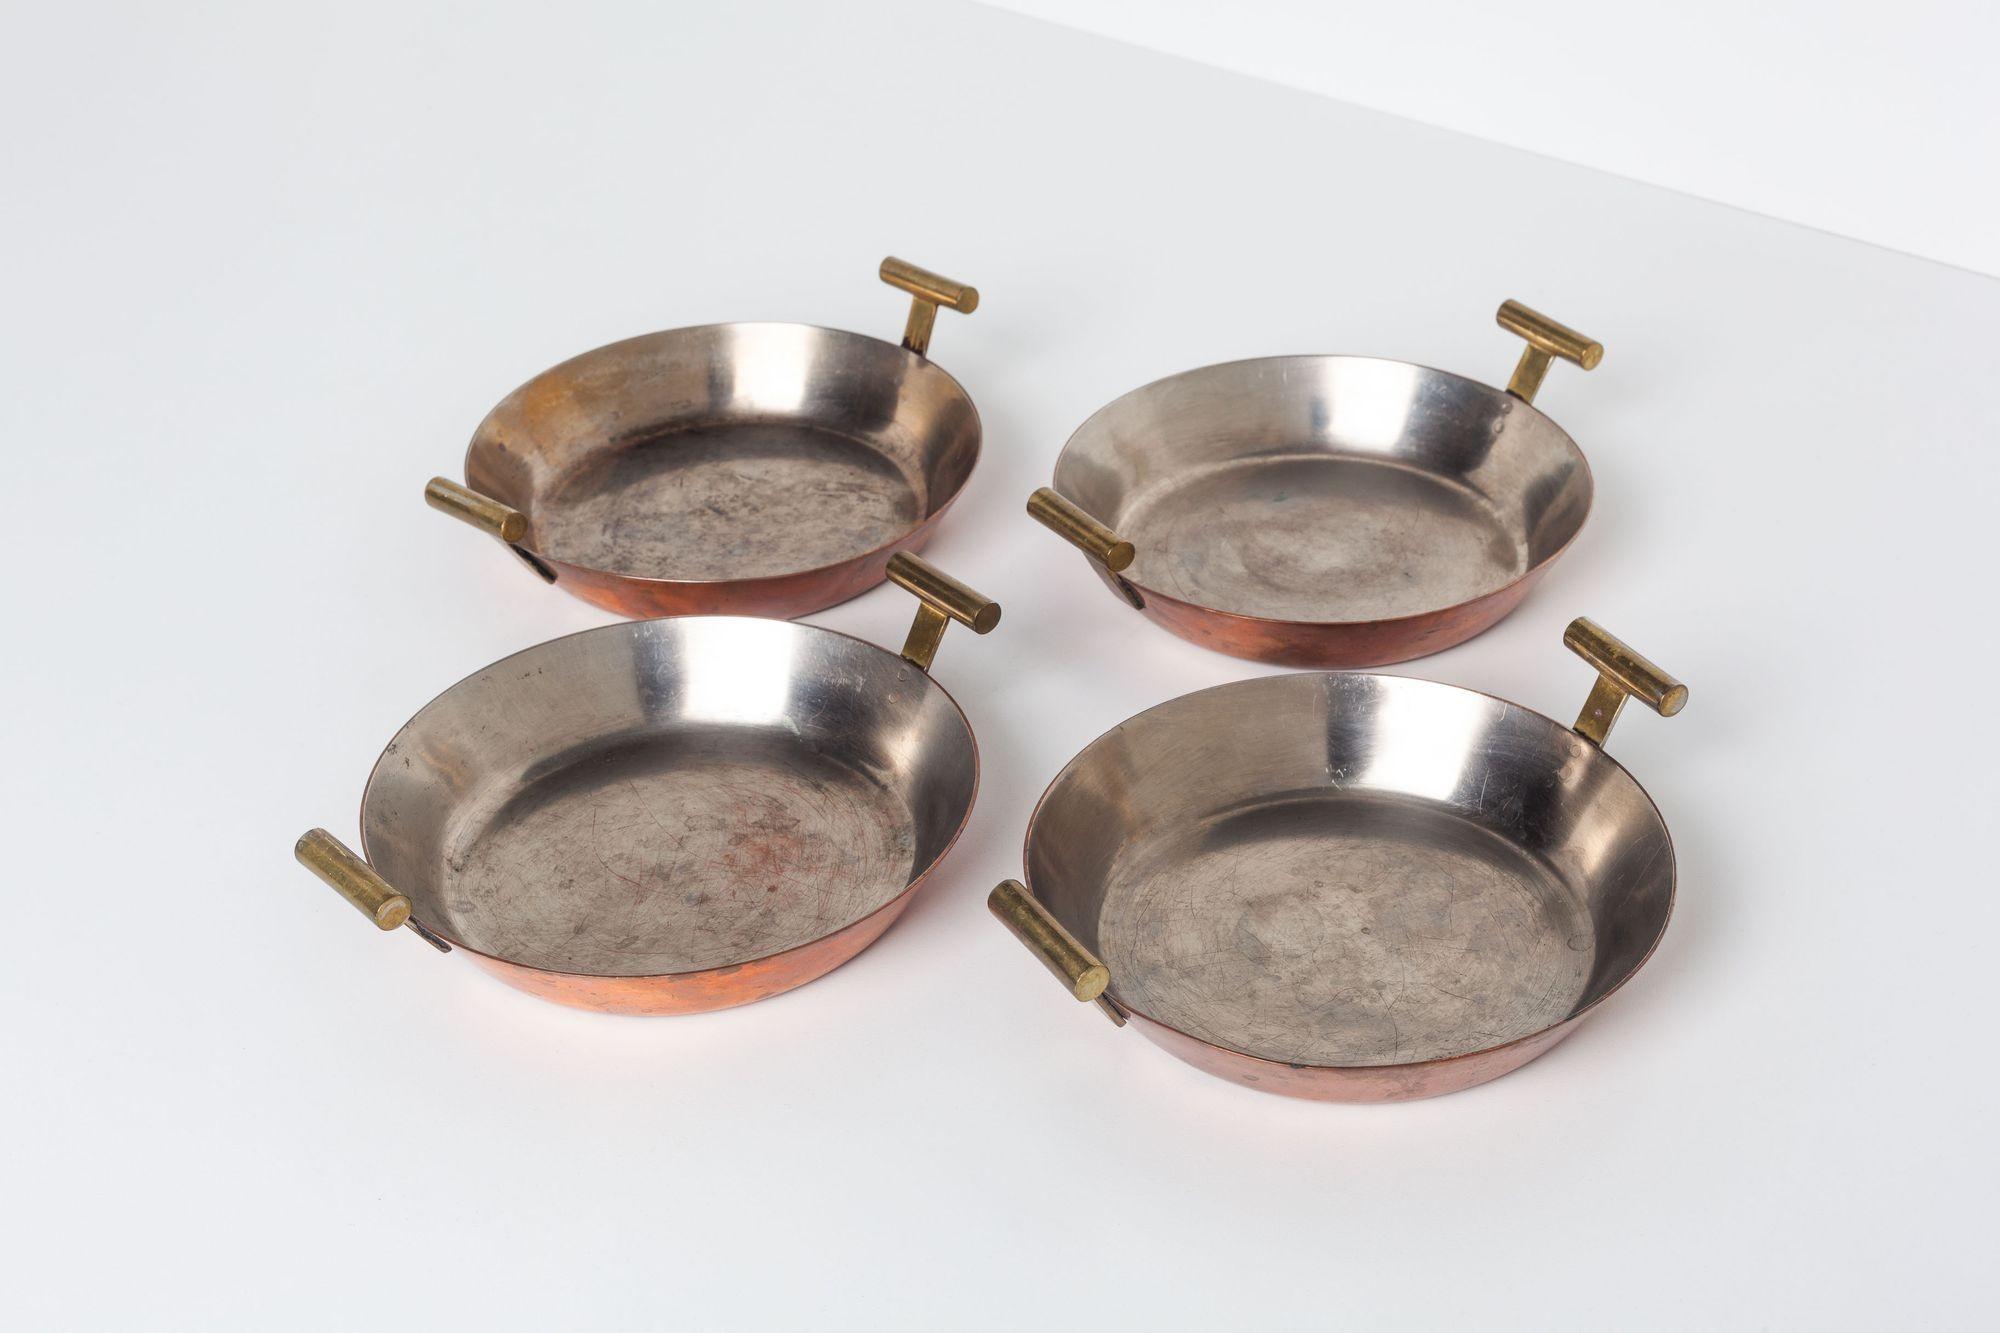 Carl Aubock Steel and Copper Egg Pans, Set of Four, Model 4301
Cast brass handles stamped 'Auböck MADE IN AUSTRIA'